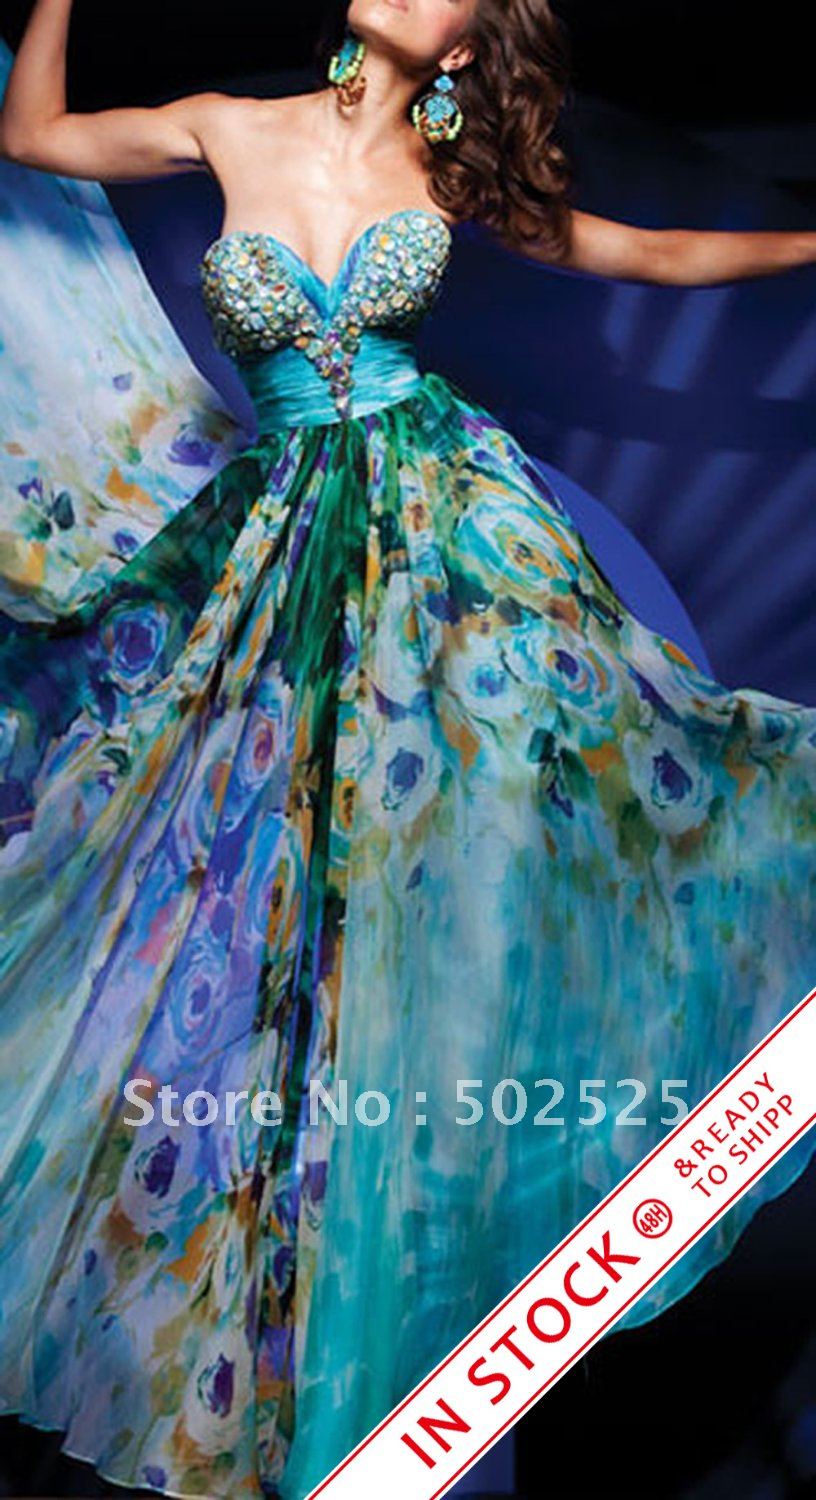 Real Photoes Printing Fabirc Pleat and beading handwork Strapless Teal Evening Dress OL101871 Free Shipping